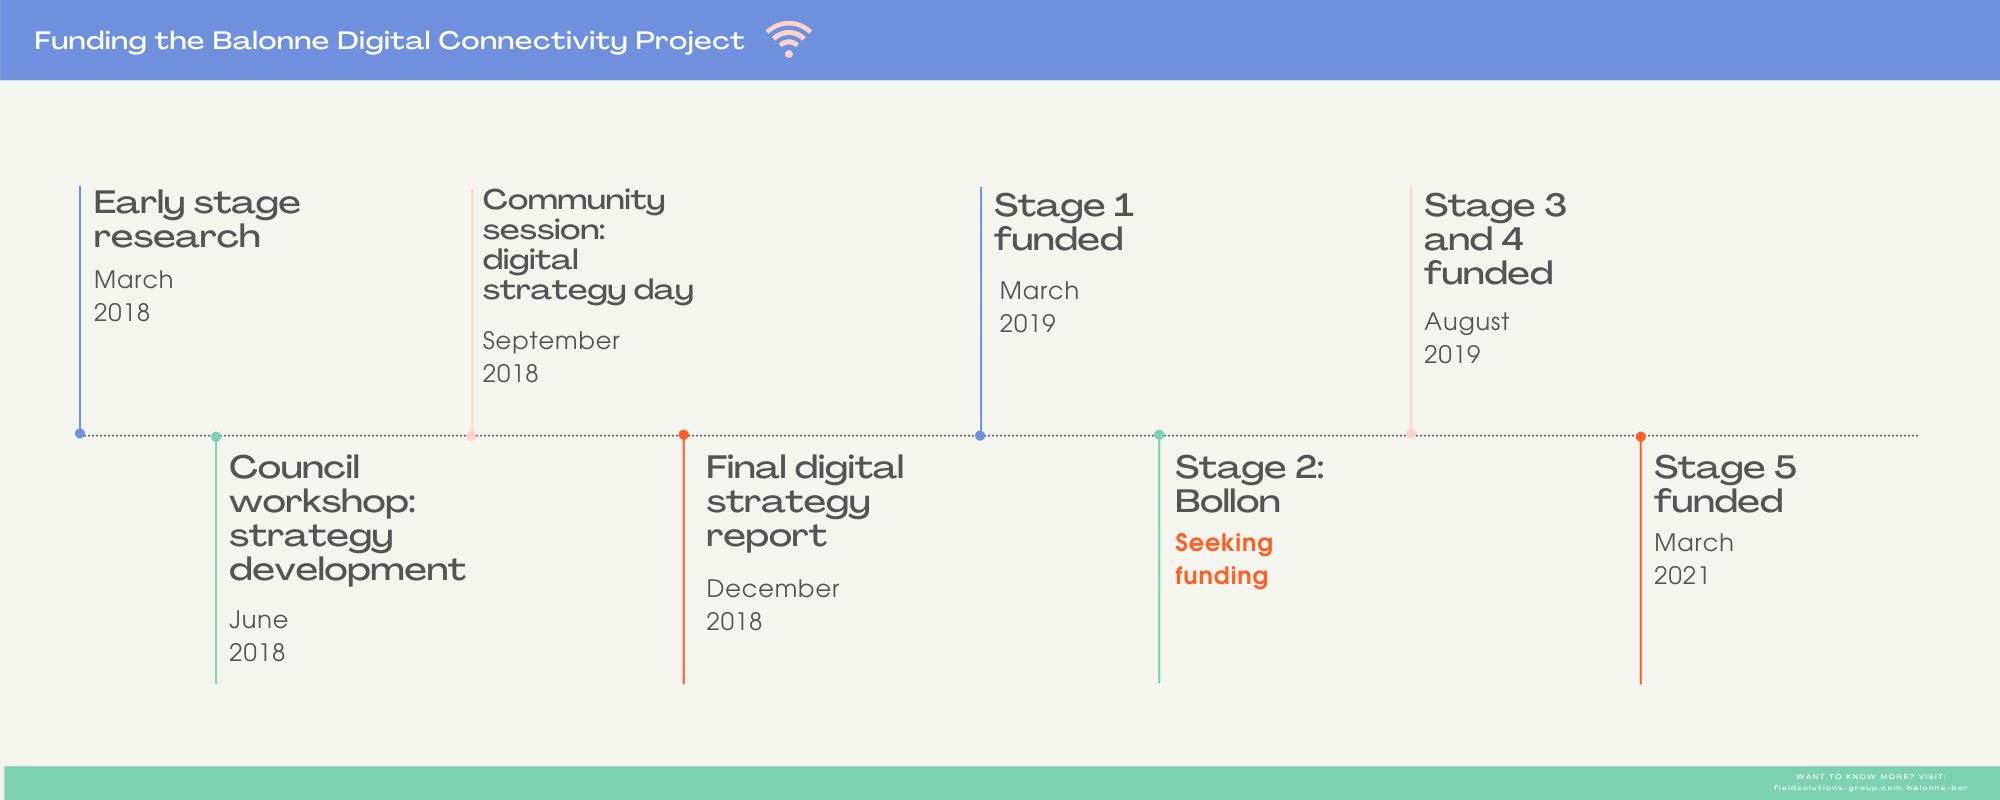 Early stage research: March 2018.
Council workshop - strategy Development: June 2018.
Community session - digital strategy day: September 2018.
Final digital research report: December 2018.
Stage 1 funded: March 2019.
Stage 2 - Bollon: seeking funding.
Stage 3 and 4 funded: August 2019.
Stage 5 funded: March 2021.